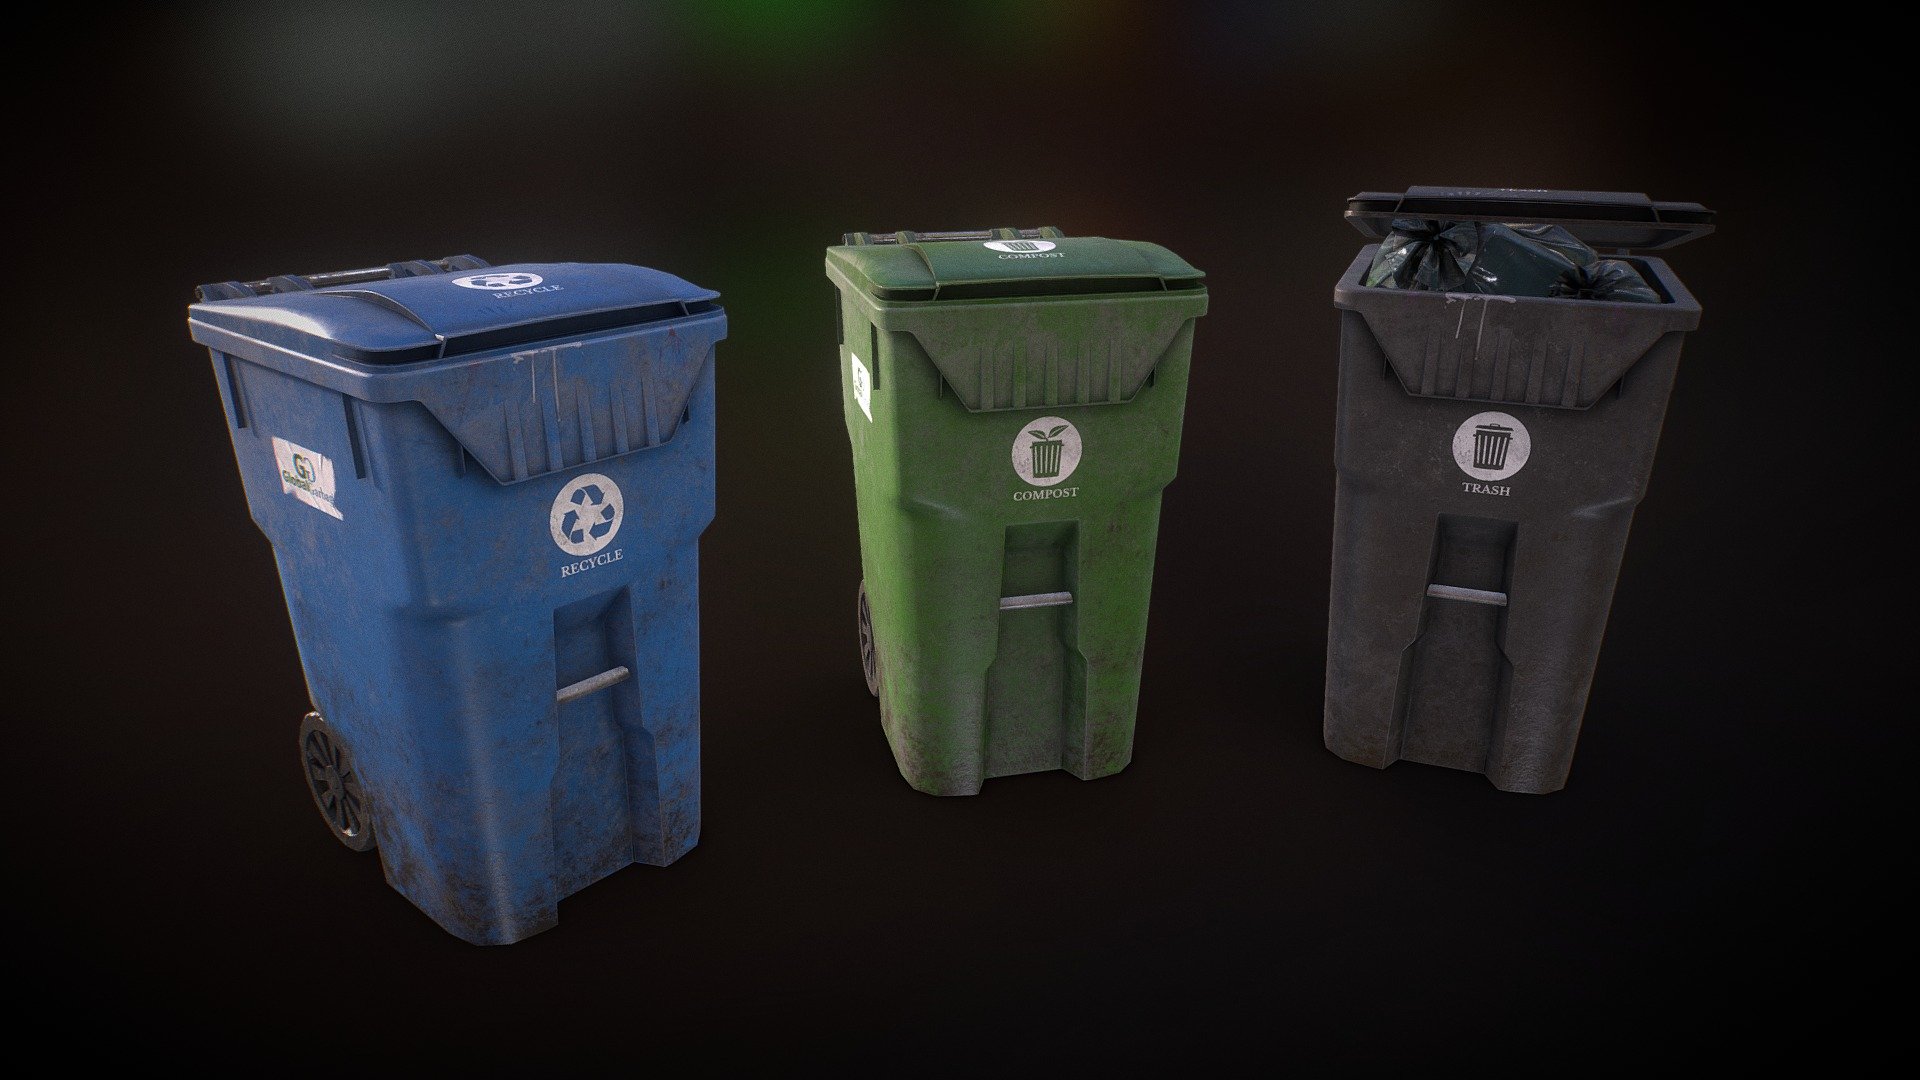 3D Low Poly game ready model of a Plastic Trash Bin with garbage bags. 

Model includes clean and dirty PBR textures with 3 different colors (green, blue and black), each one of the labeled (as compost, recycle and trash) and with a non-existing brand:


Created with 3ds Max 2018
Textured in Substance Painter
Real-world scale and centered
UnwrapUVW included
The unit of measurement used for the model is centimeters
Polys: Trash Bin - 2515 each (4827 tris). Garbage bags - 1239 for both (2425 tris). 
PBR Materials with 4k textures (1 for trash bin and 1 for bags)
Pivot correctly placed to animate lid
Textures included: Albedo, Normals, Metalness, Roughness, AO.
Rendered in Marmoset Toolbag

Archive includes:


Trash Bin model with clean and dirty textures in 3 different colors
2 Garbage bags models with textures and 3 different albedos
High-res textures.

Included formats: FBX / OBJ / 3DS

This model can be used for any game, personal project, etc. You may not resell any content - Plastic Trash Bin with Garbage Bags - Low Poly - Buy Royalty Free 3D model by MSWoodvine 3d model